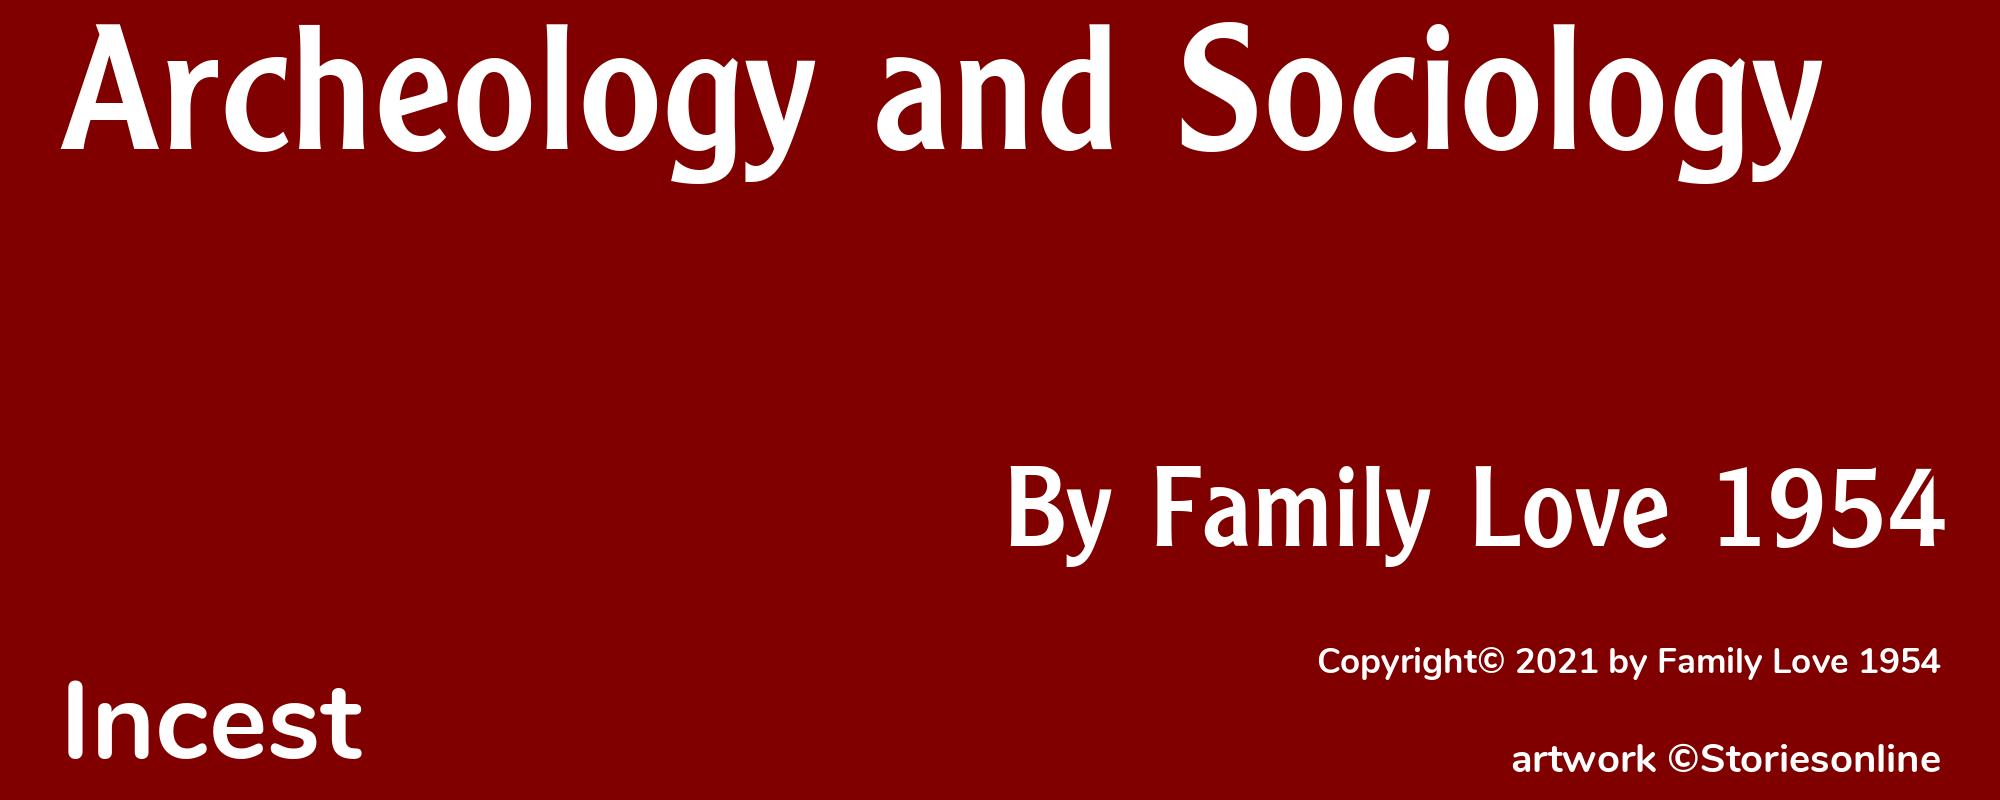 Archeology and Sociology - Cover